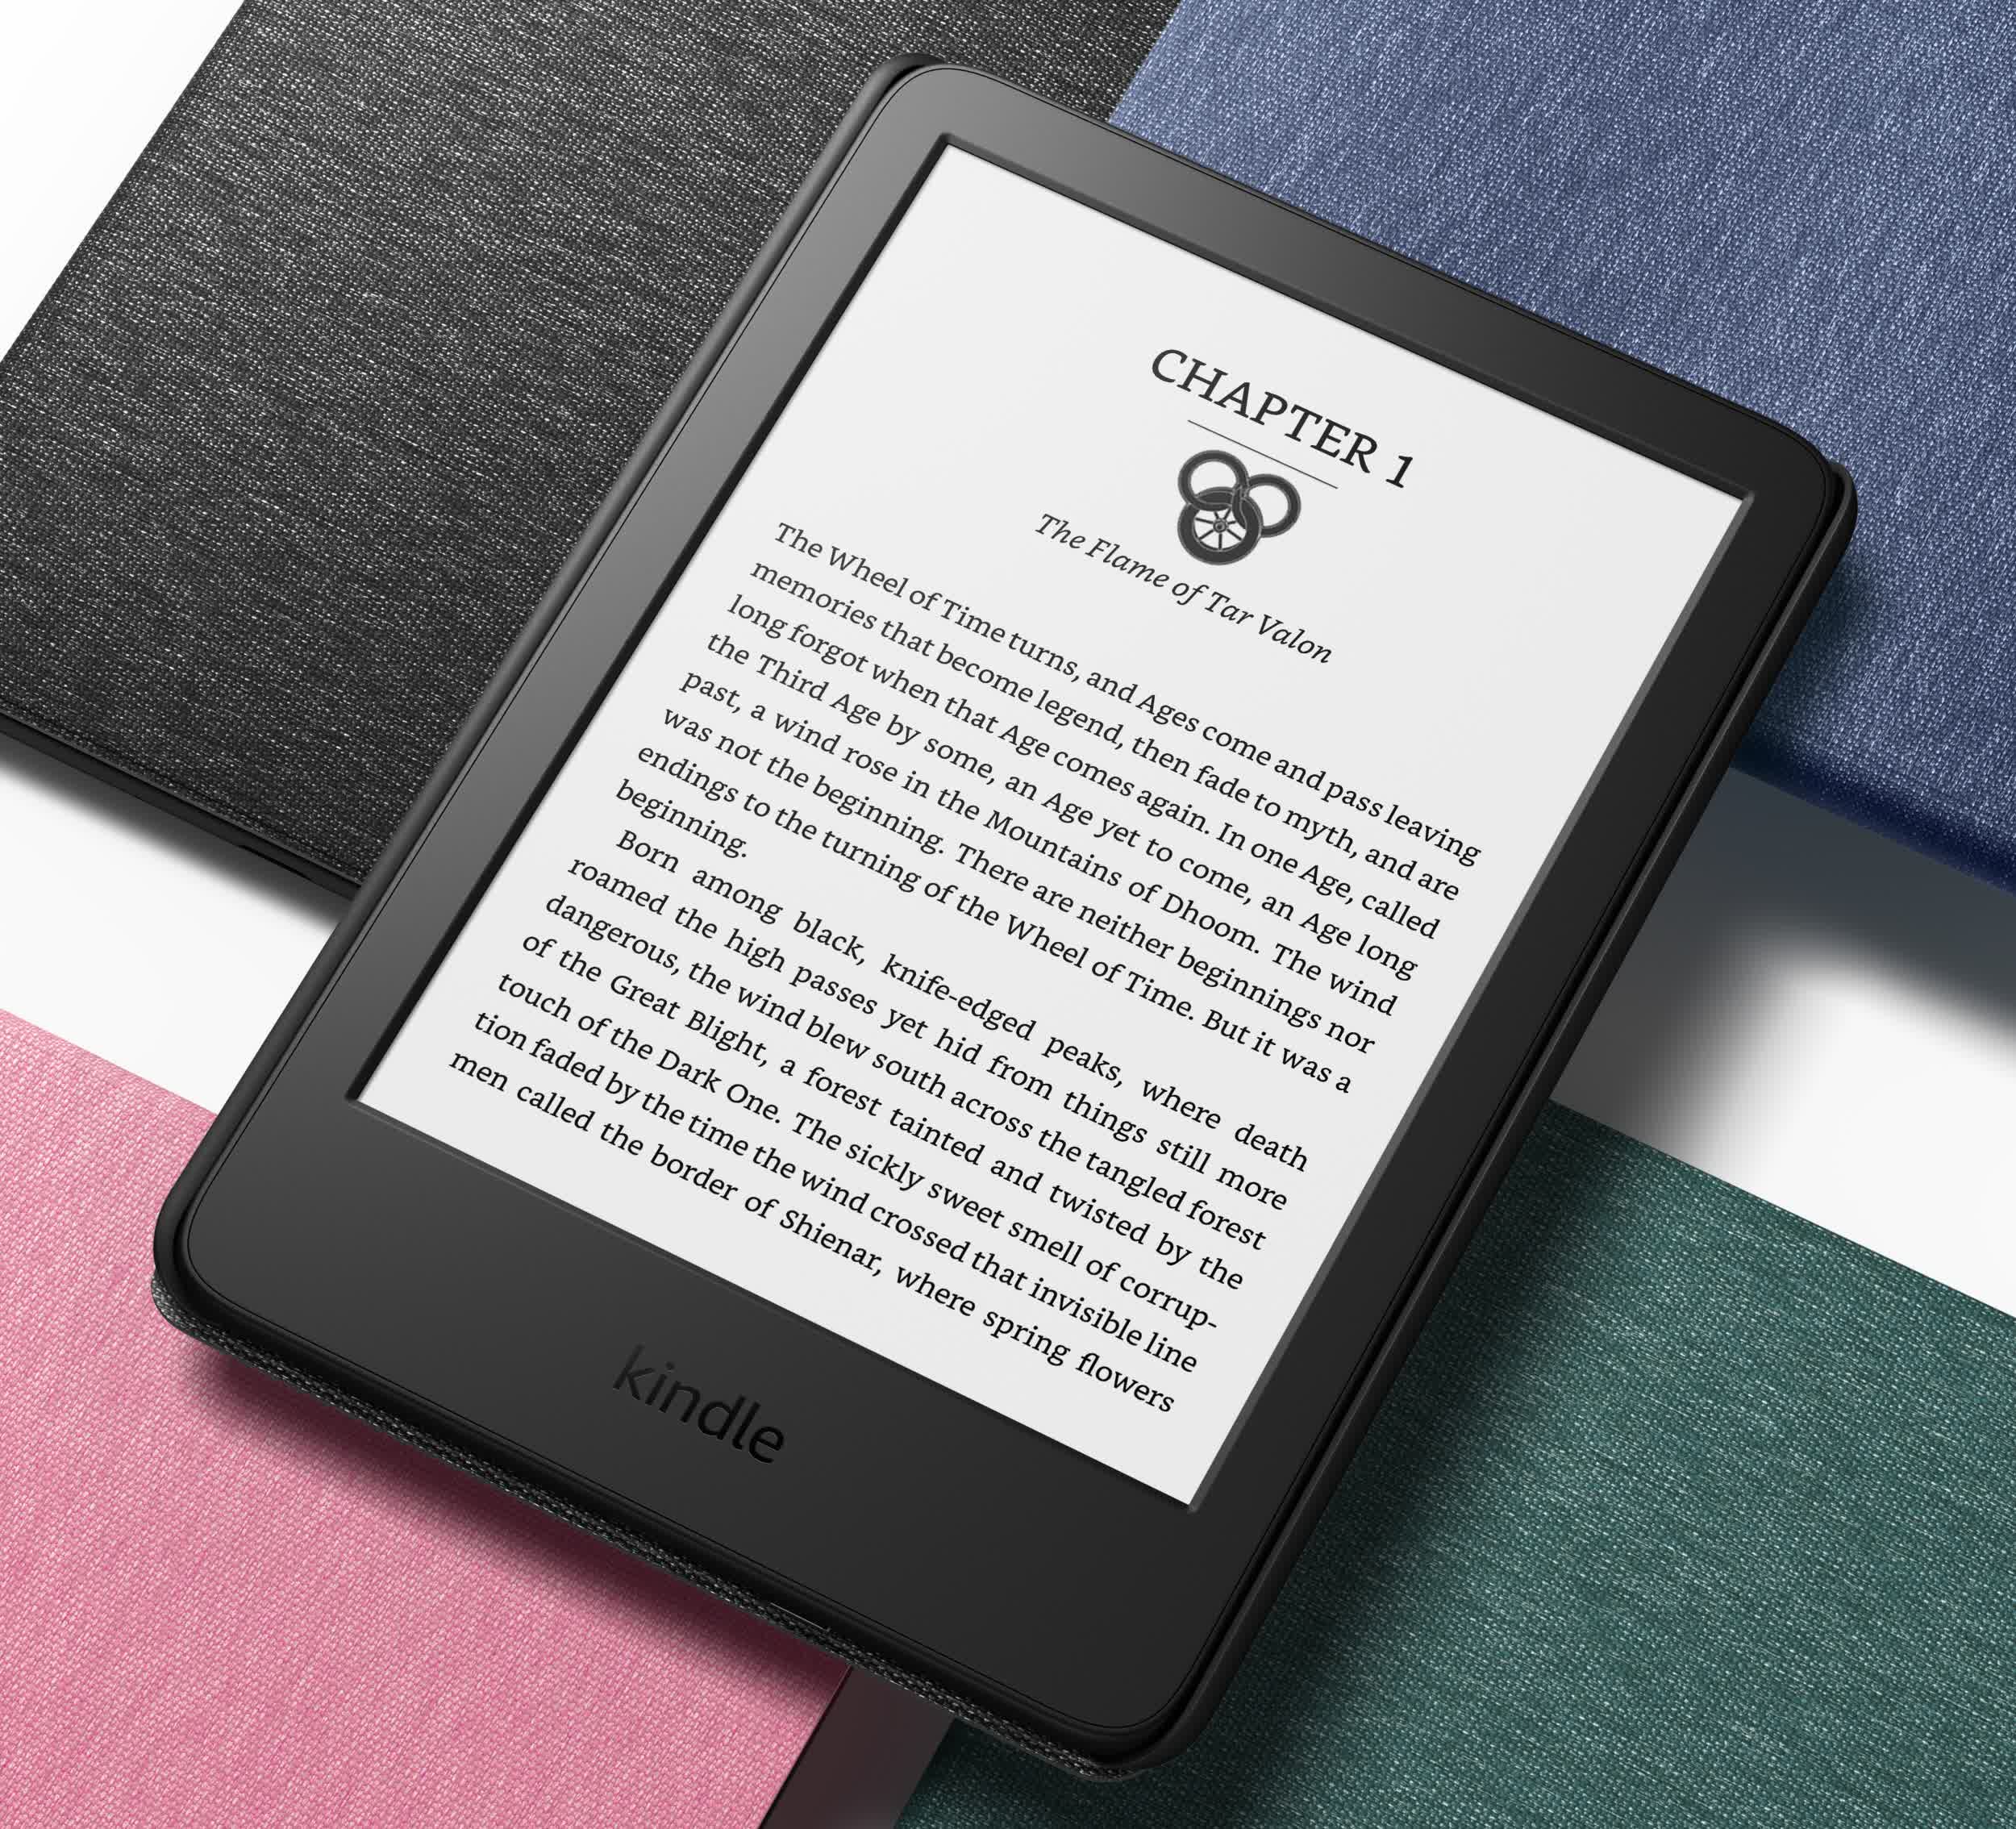 Amazon's refreshed entry-level Kindle get a higher-res screen and double the storage